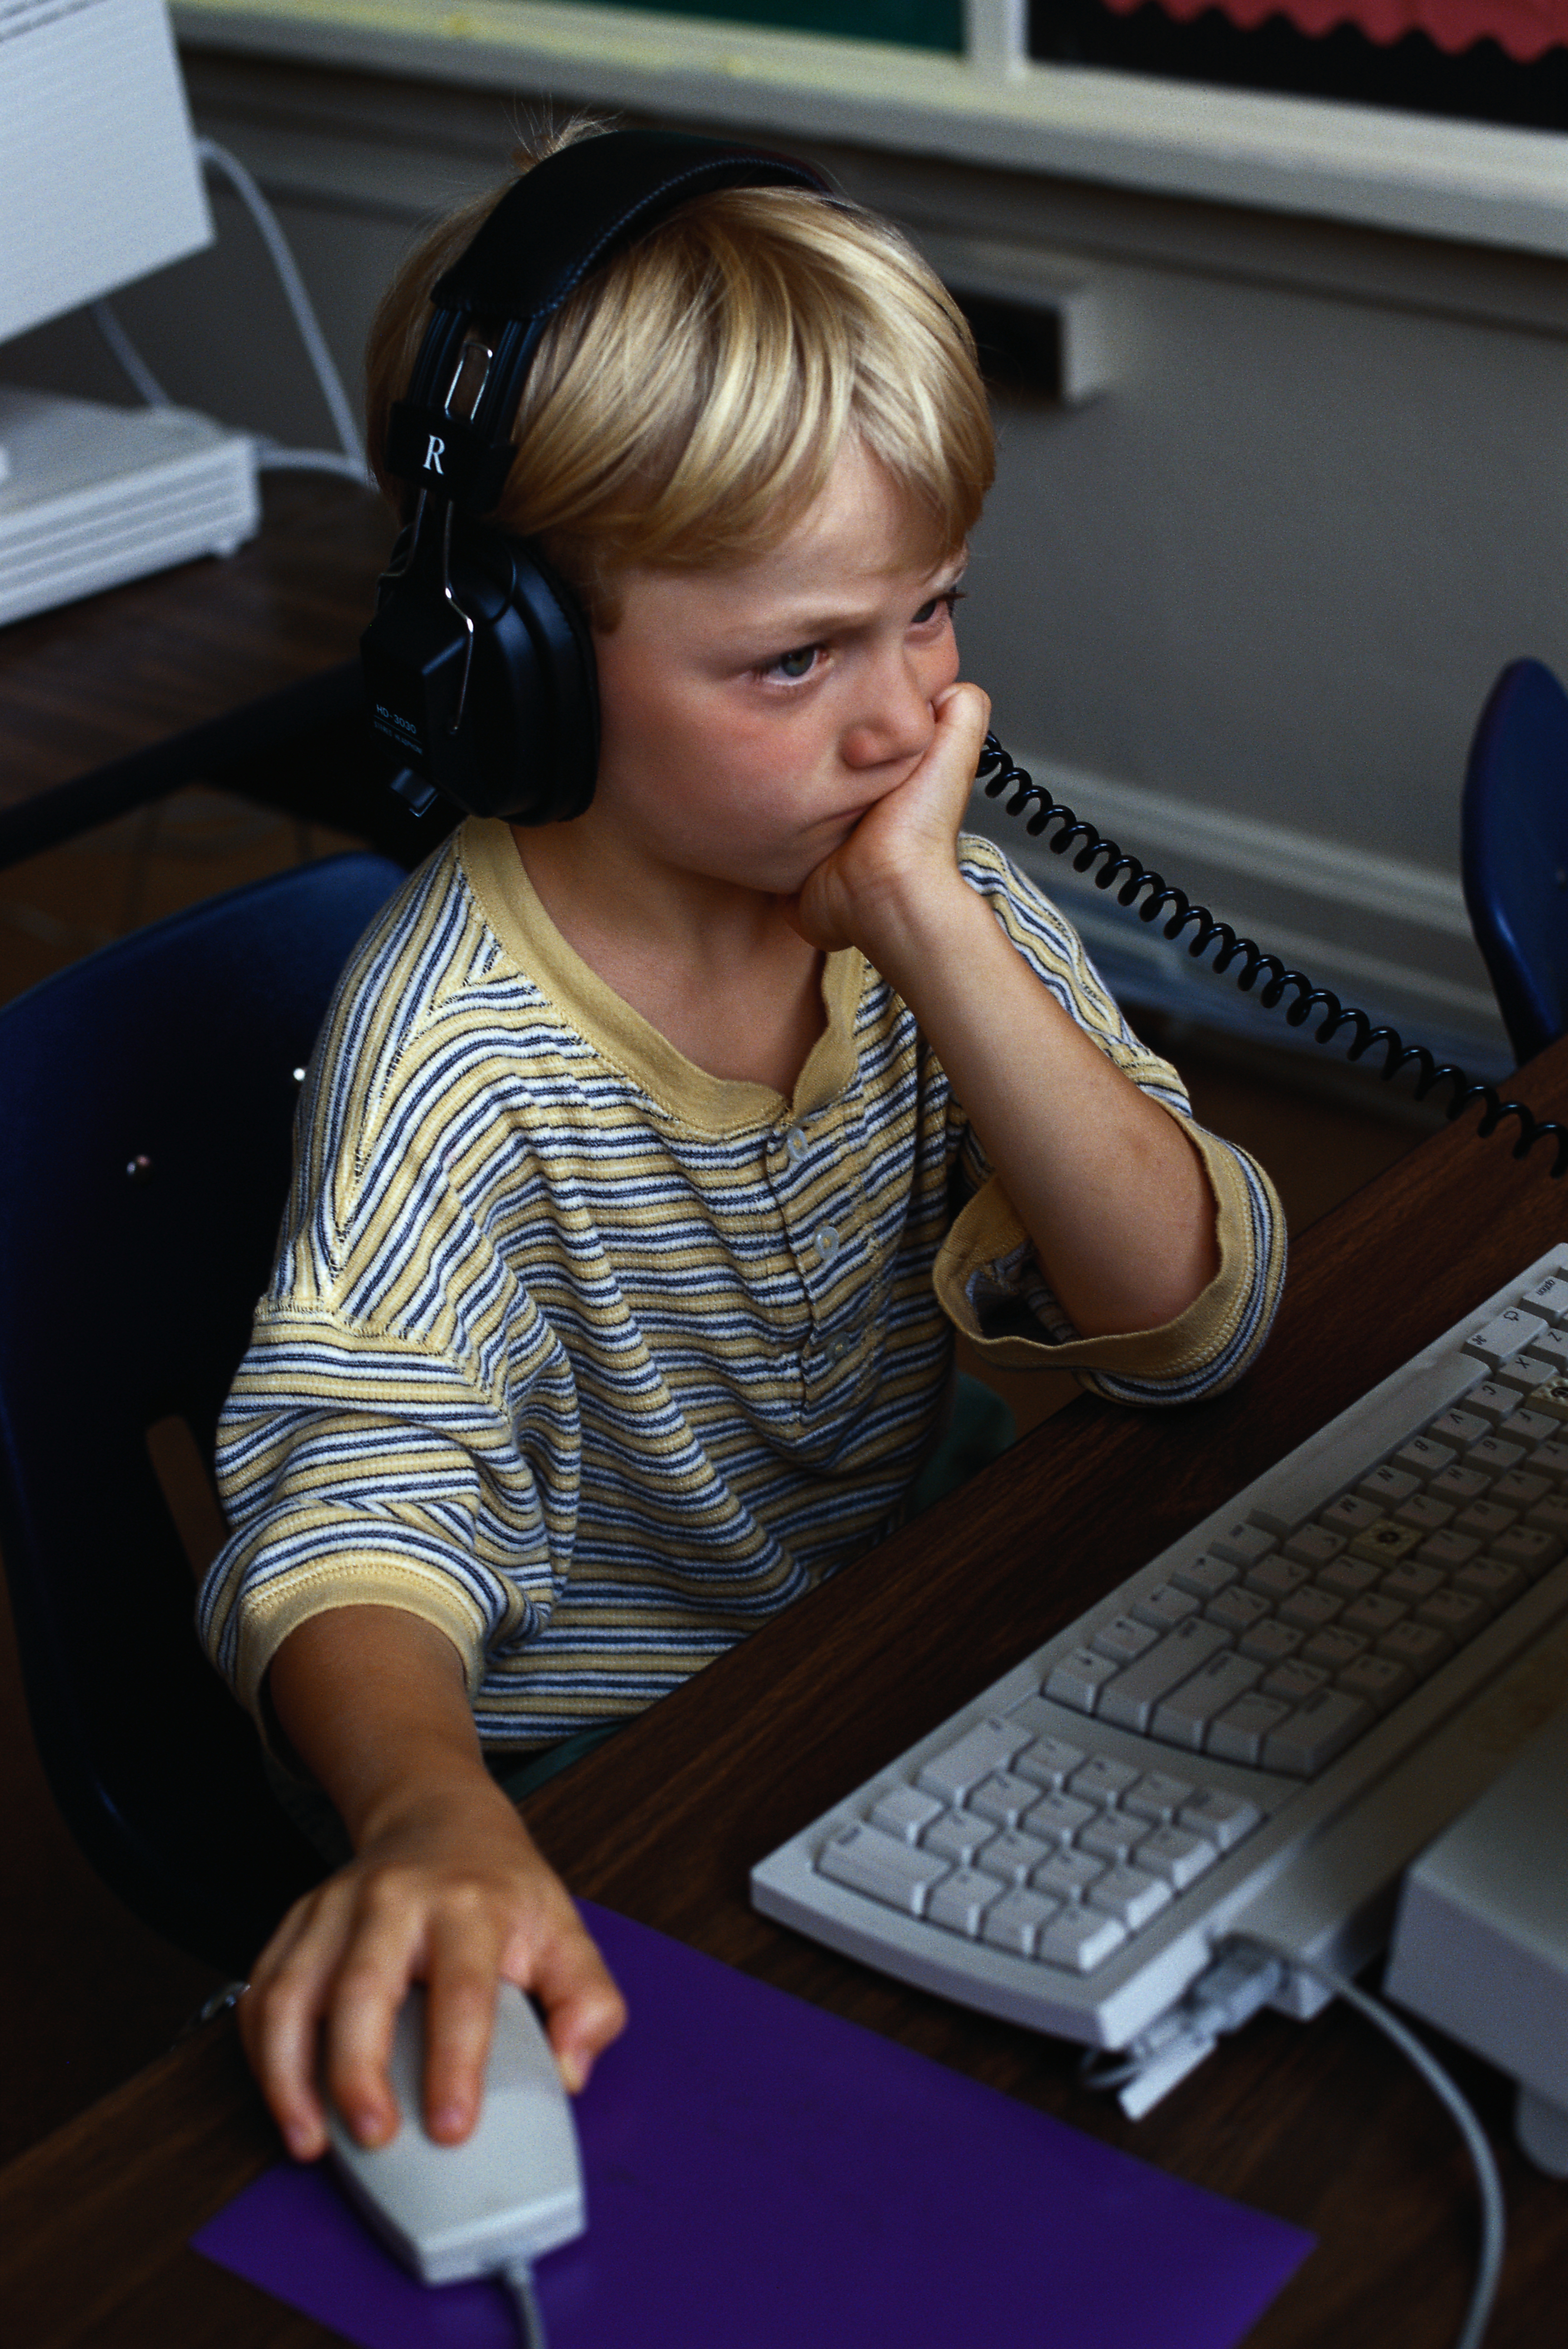 Child in a striped top uses a computer mouse and wears headphones, looking focused